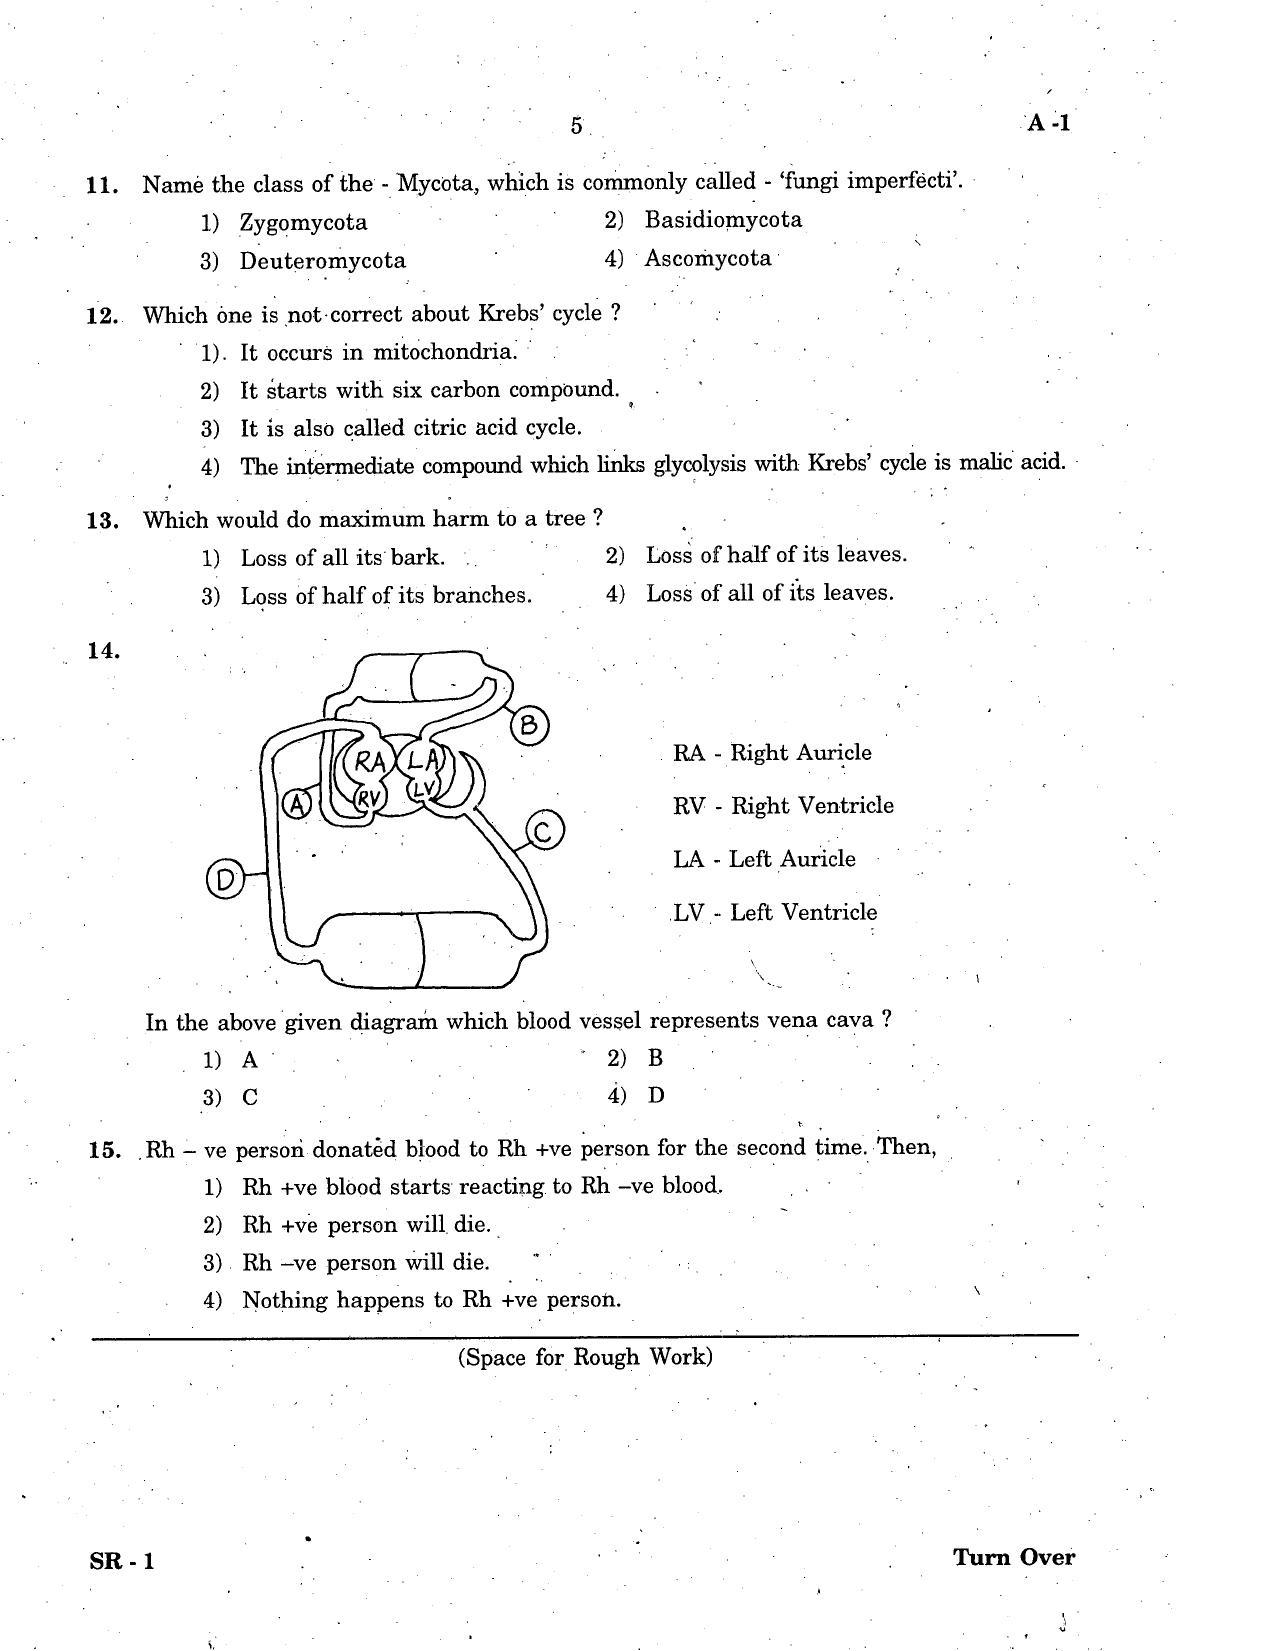 KCET Biology 2007 Question Papers - Page 5